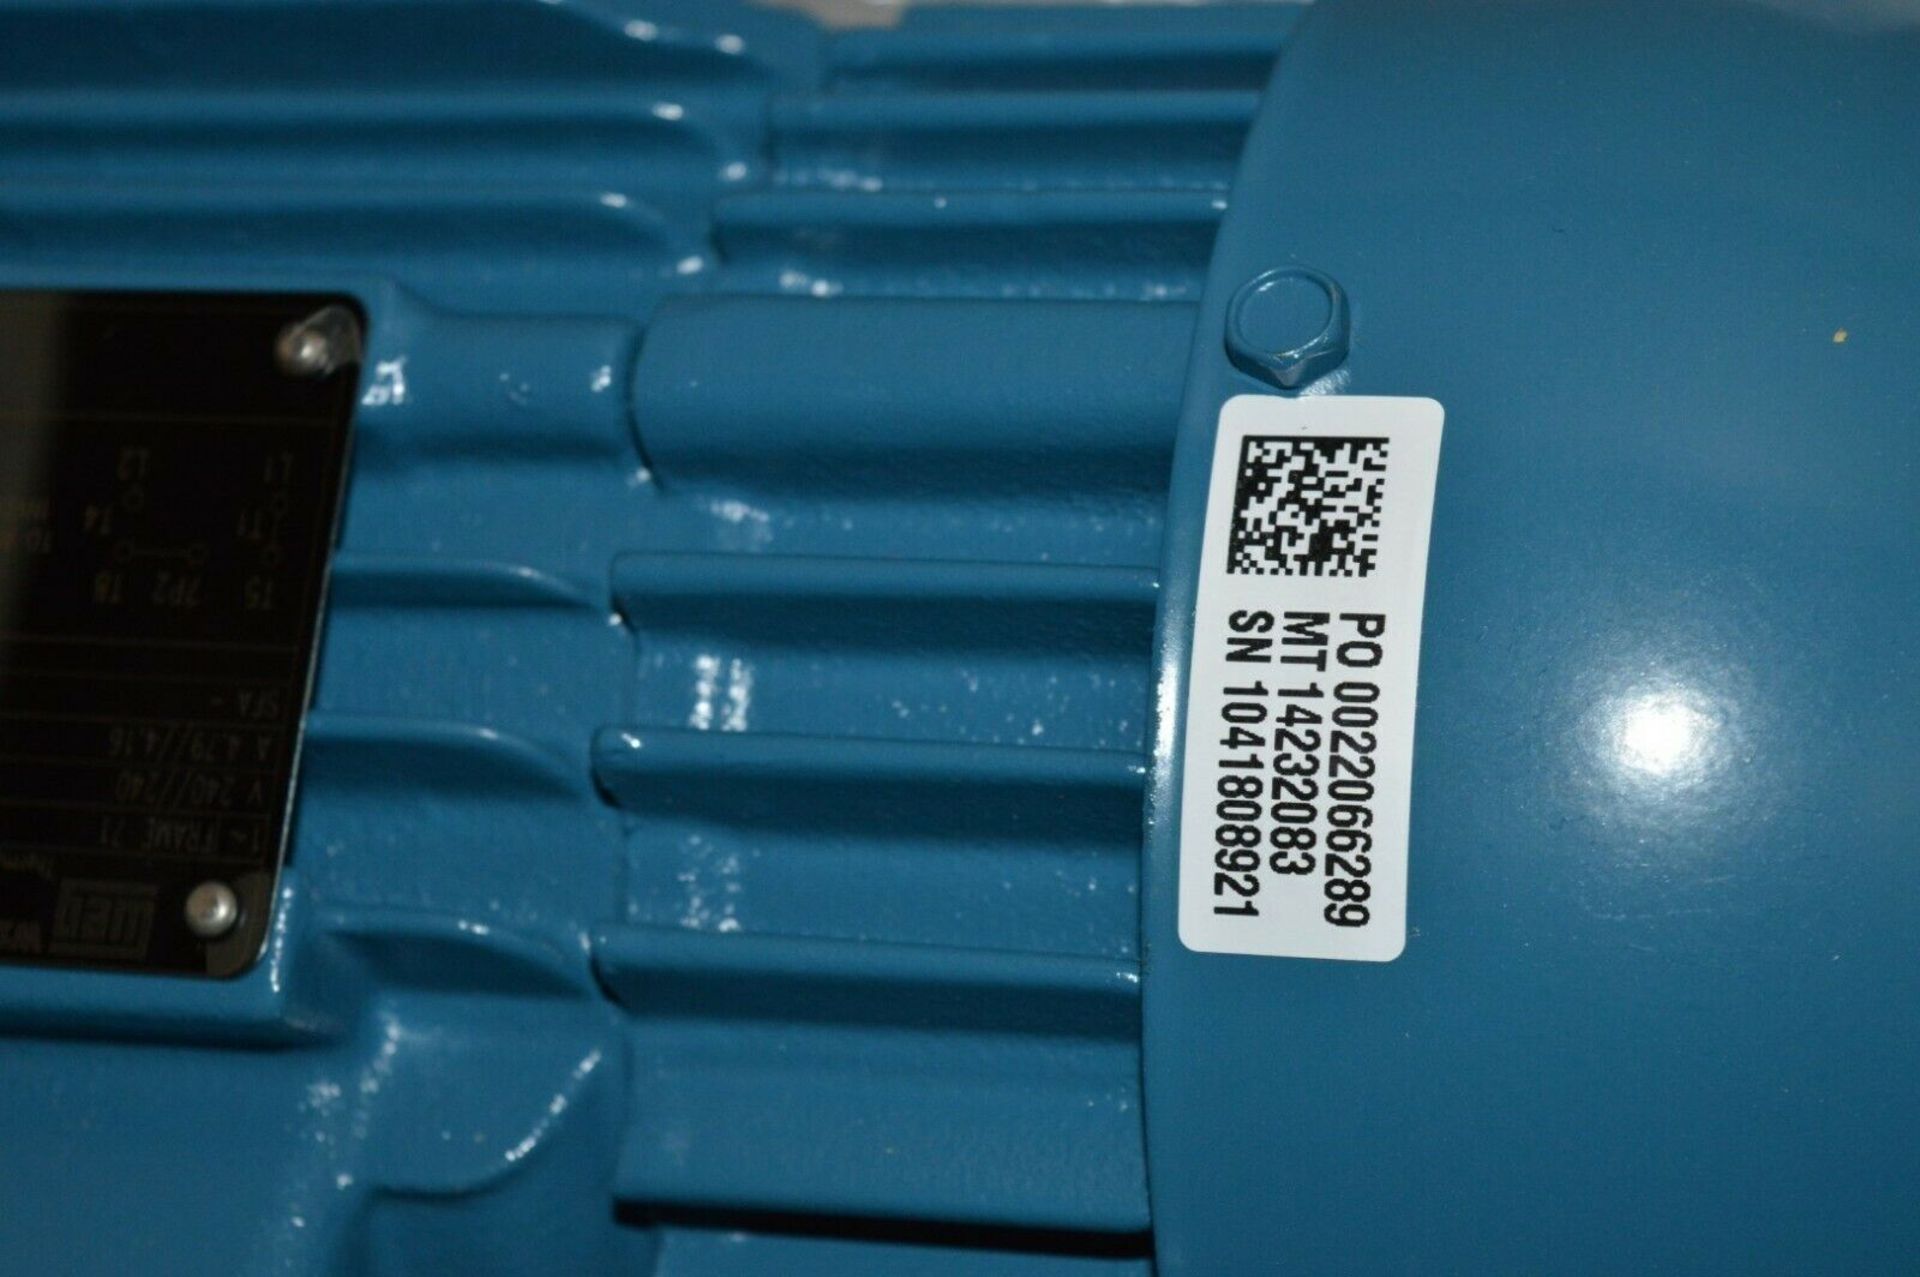 1 x Weg W22 110v IP55 Single Phase Electric Motor - Brand New and Boxed - CL295 - Location: - Image 6 of 7